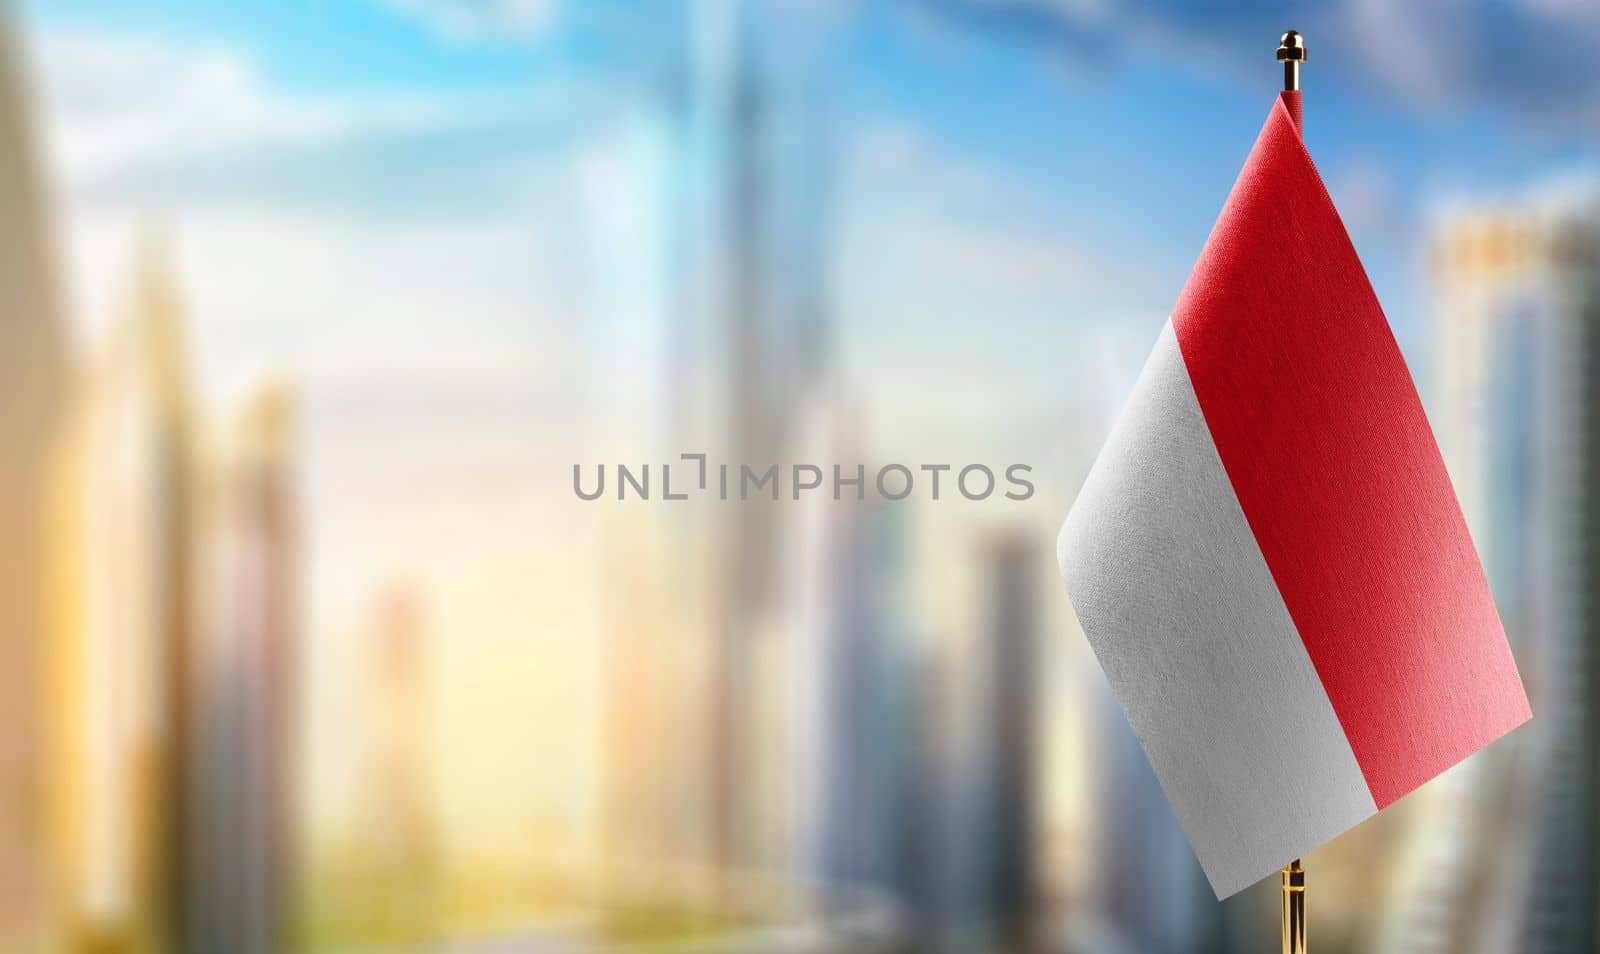 Small flags of the Indonesia on an abstract blurry background by butenkow